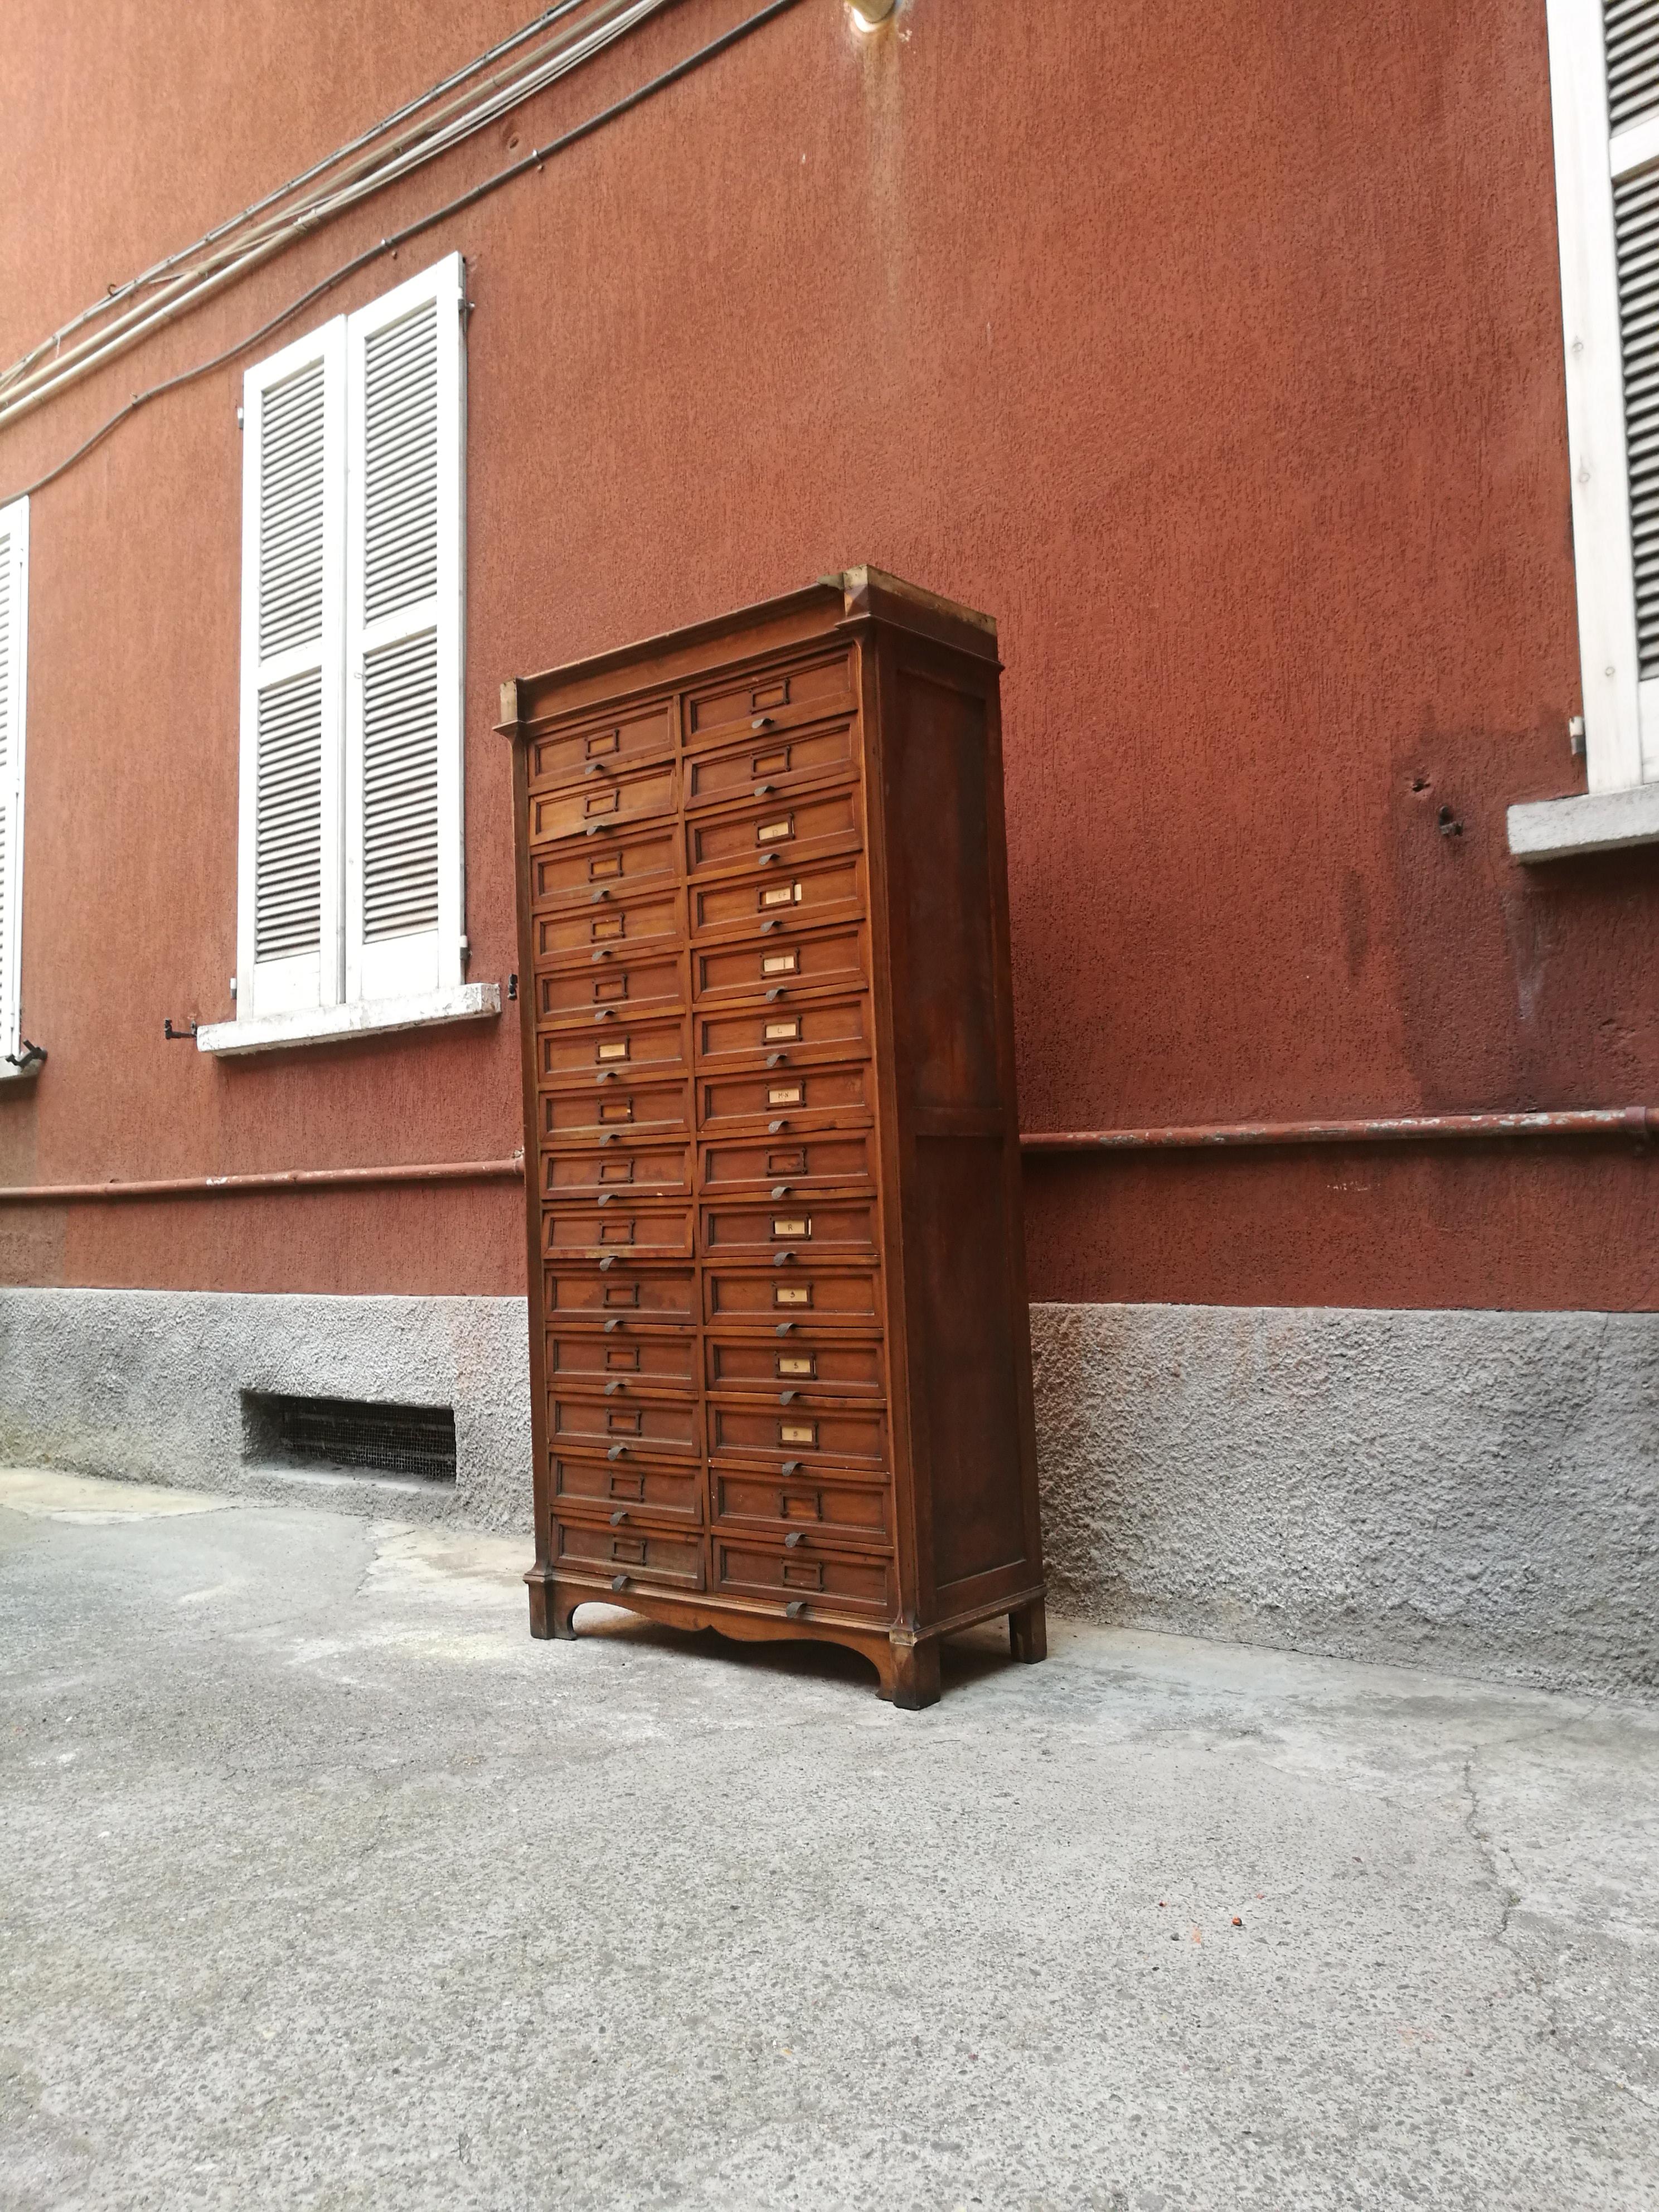 Italian mid-century wood archive stand, 1940s
Walnut archive dresser from forties, made in Italy. 28 drawers, with brass handles, were used to manage months and months of job, and still today can do this. Really high quality and grandeur make this